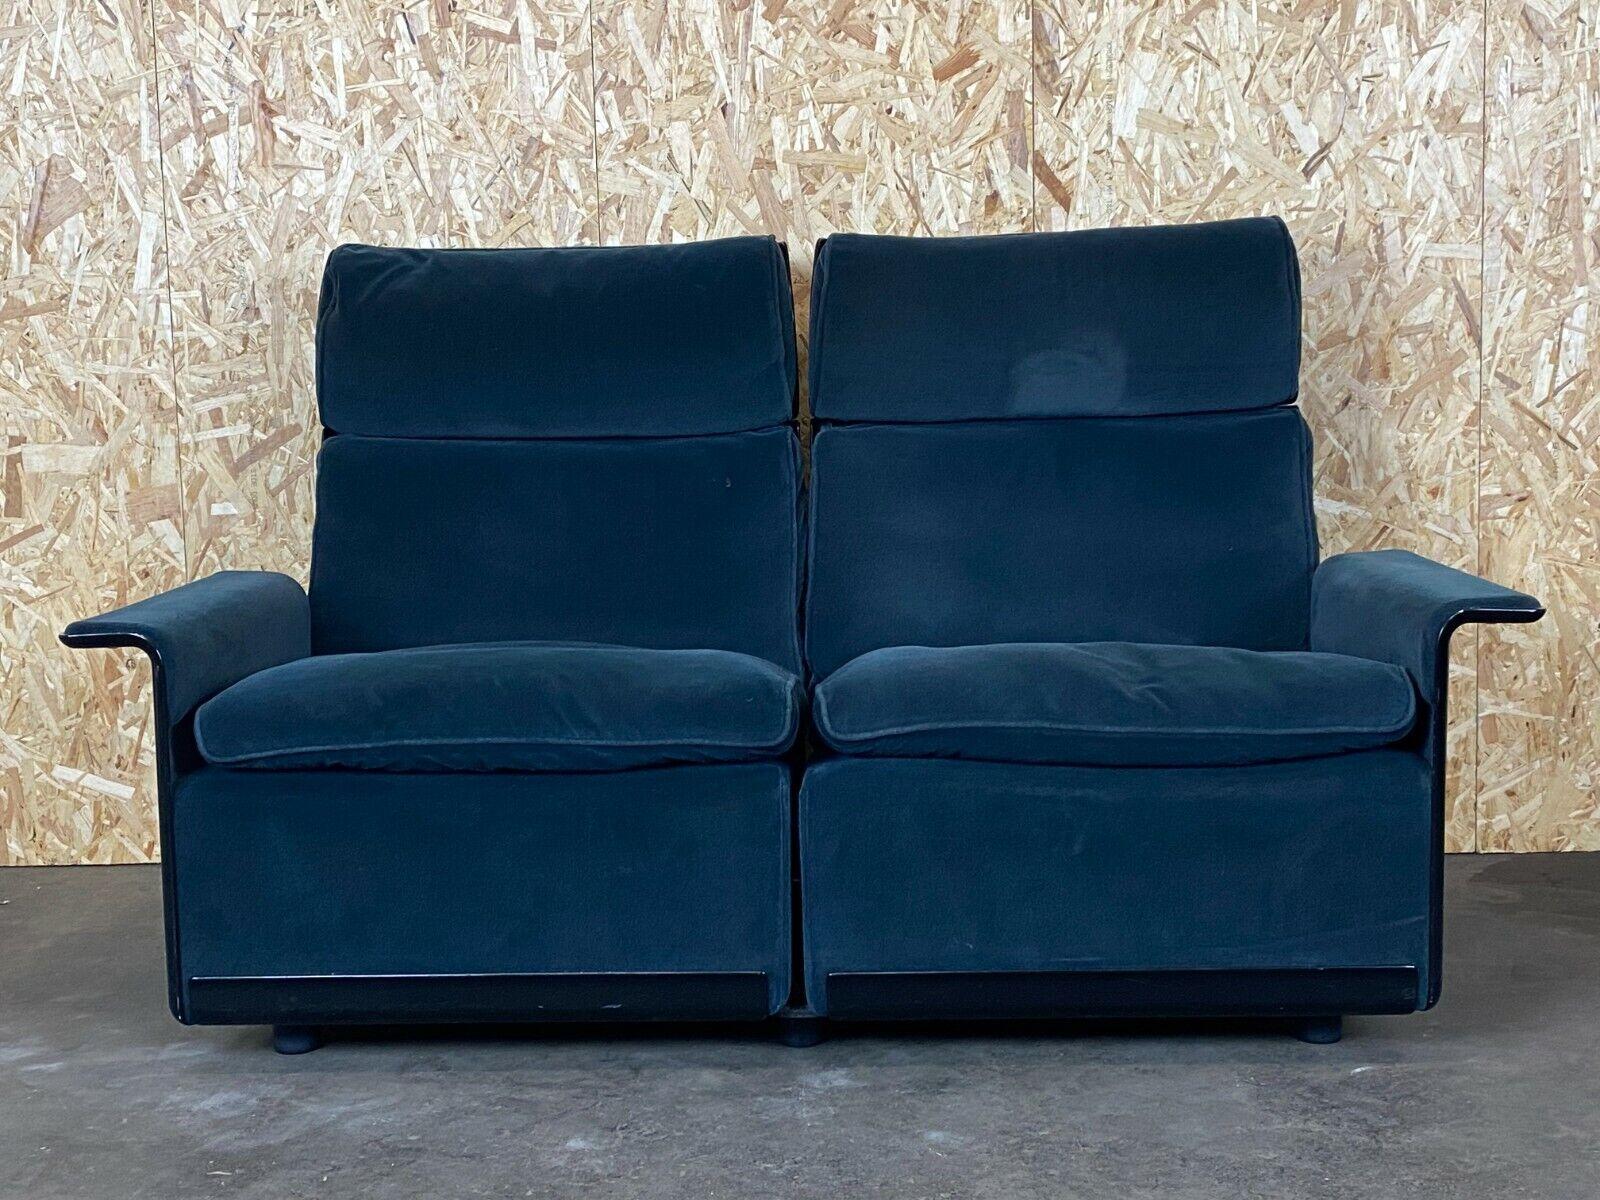 60s 70s Dieter Rams for Vitsoe armchair program 620 design couch fabric

Object: 2-seater sofa

Manufacturer: Vitsoe

Condition: good - vintage

Age: around 1960-1970

Dimensions:

153.5cm x 81cm x 91cm
Seat height = 40cm

Other